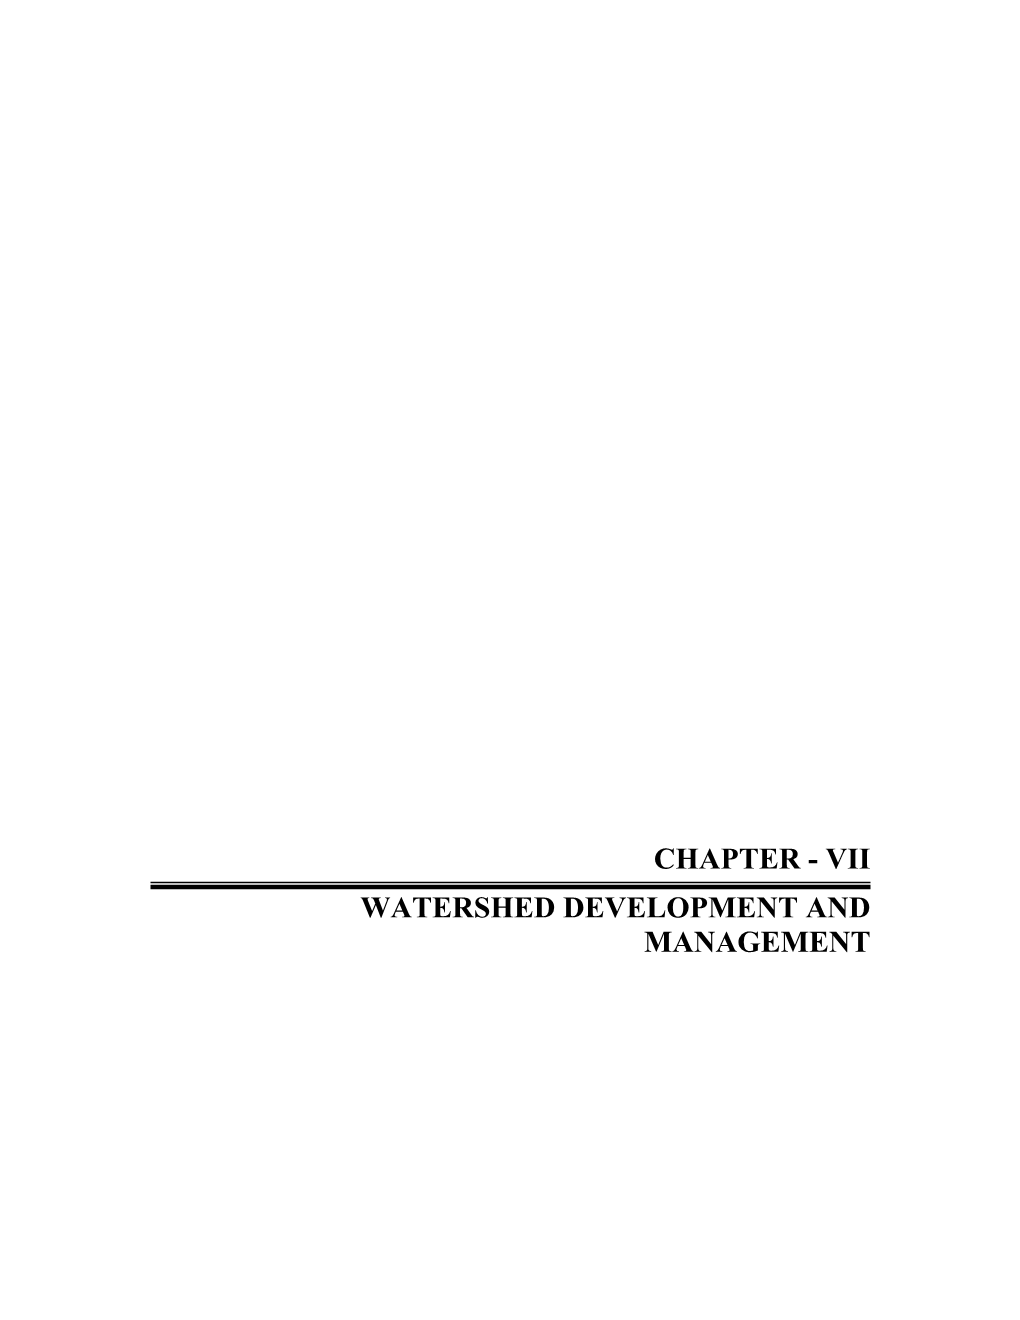 Vii Watershed Development and Management